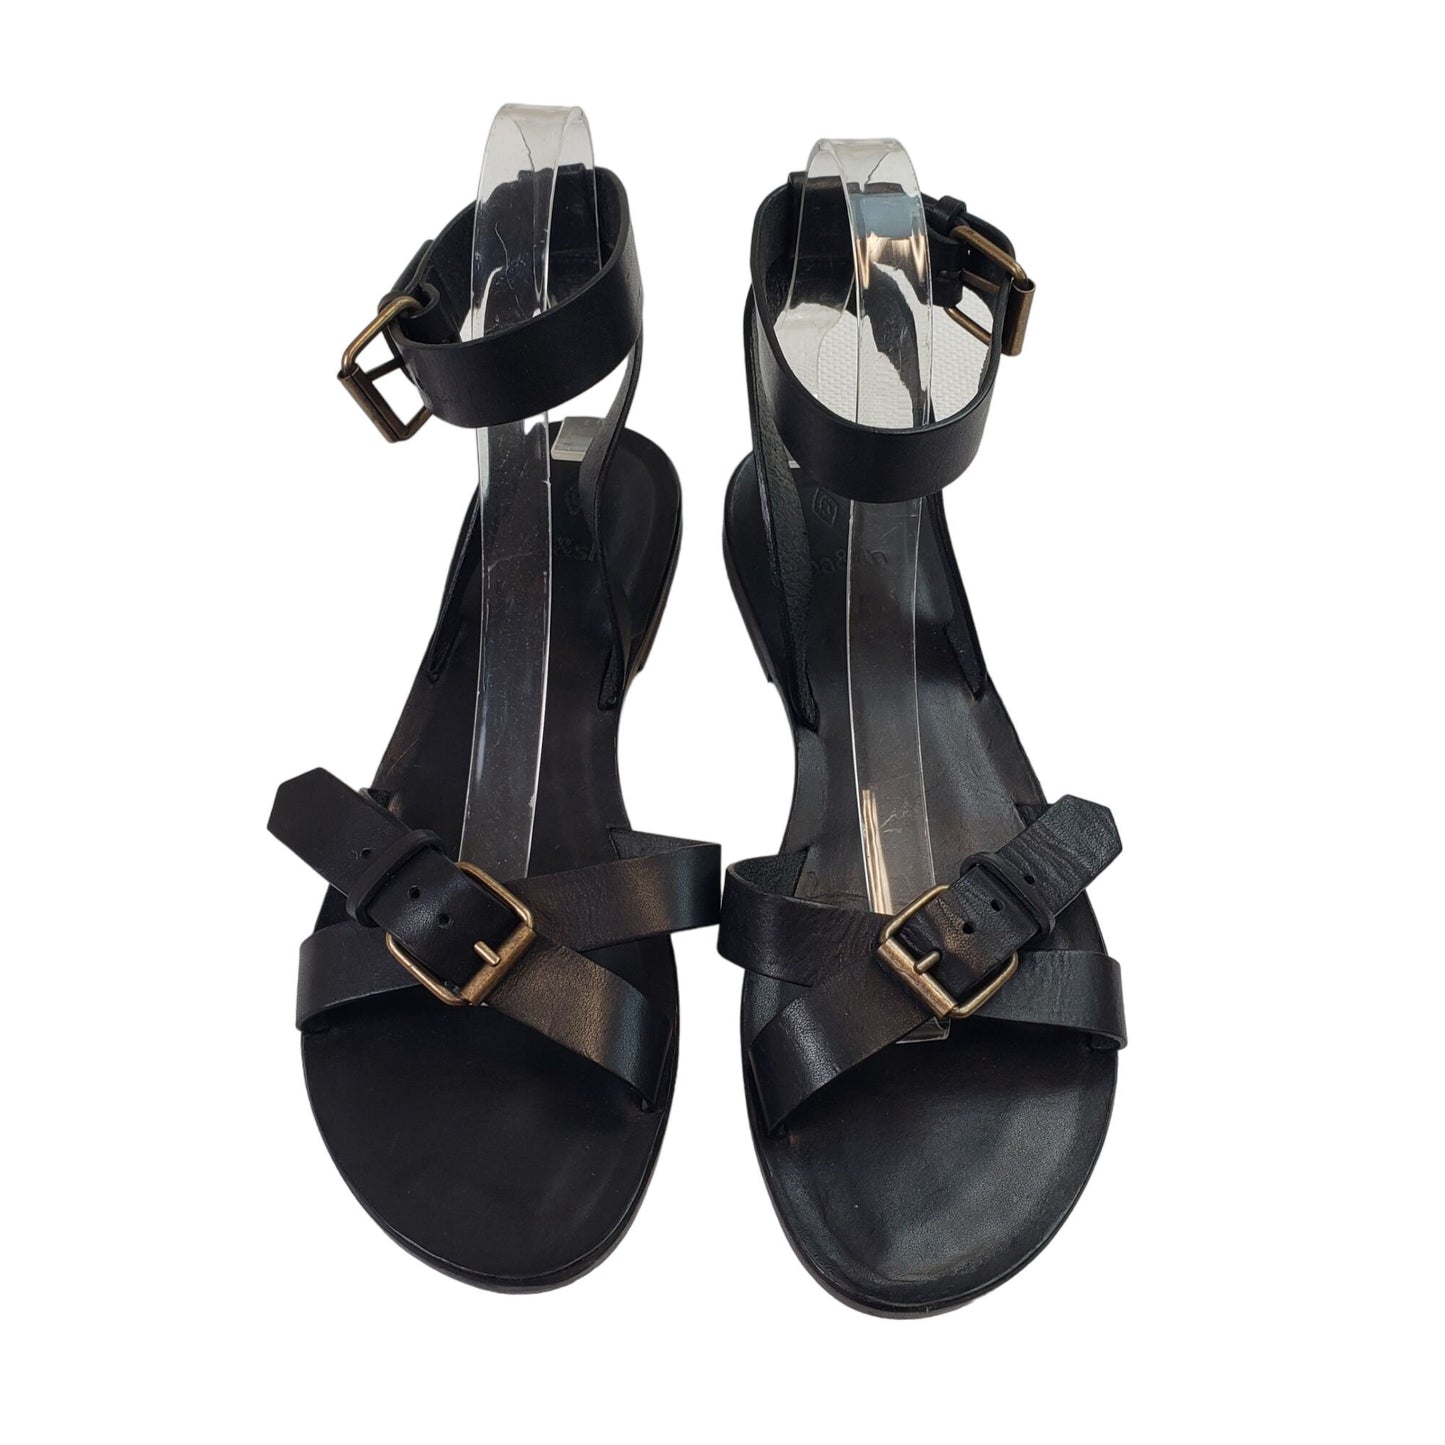 Bash Camelia Leather Strappy Ankle Sandals Size 38/US 7.5